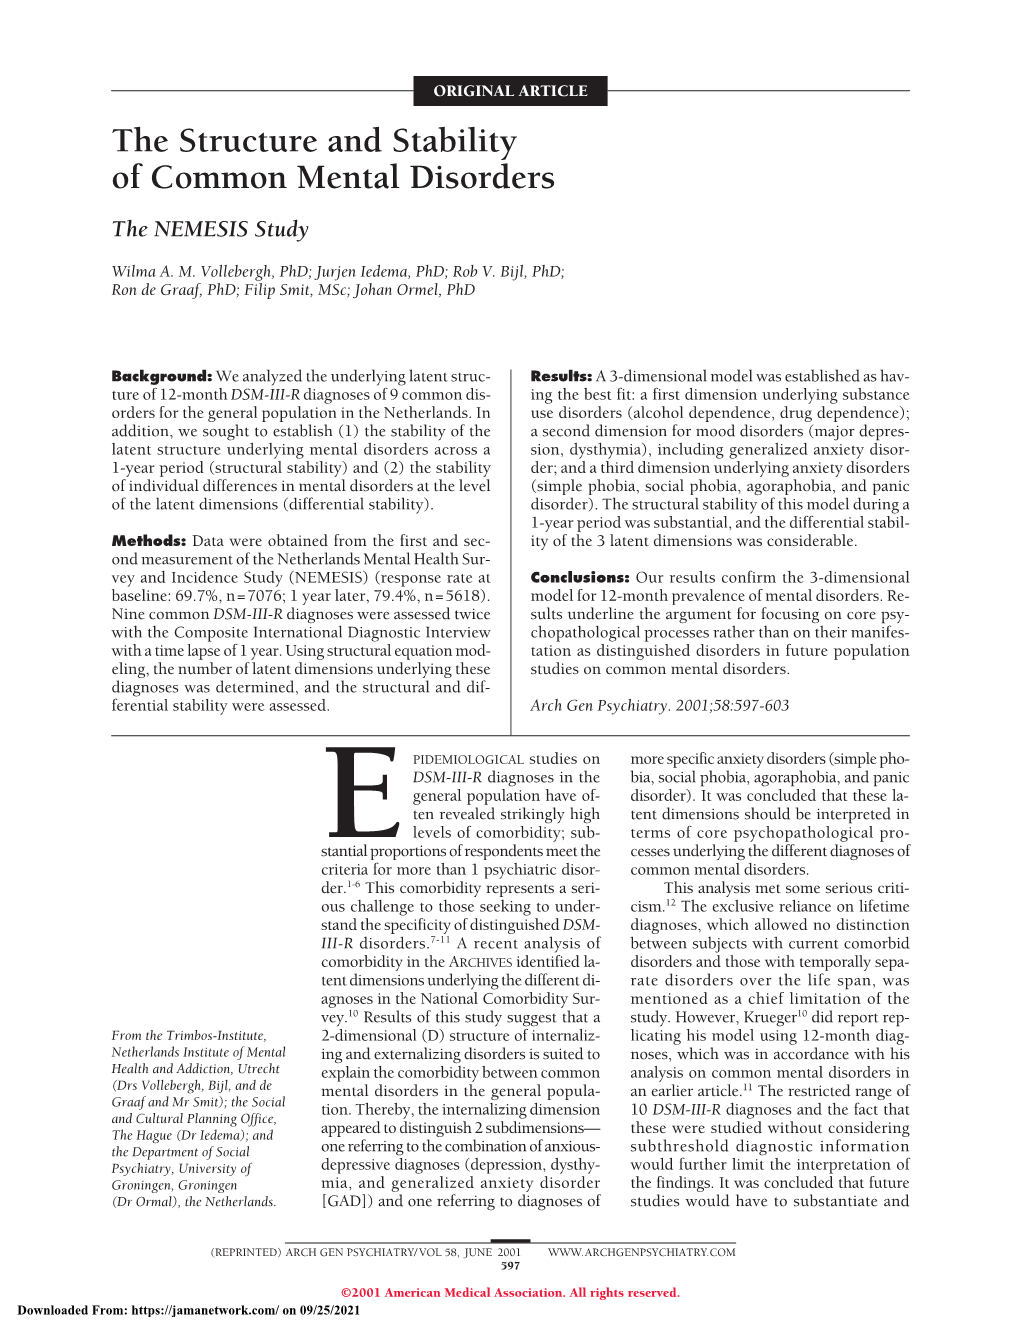 The Structure and Stability of Common Mental Disorders the NEMESIS Study